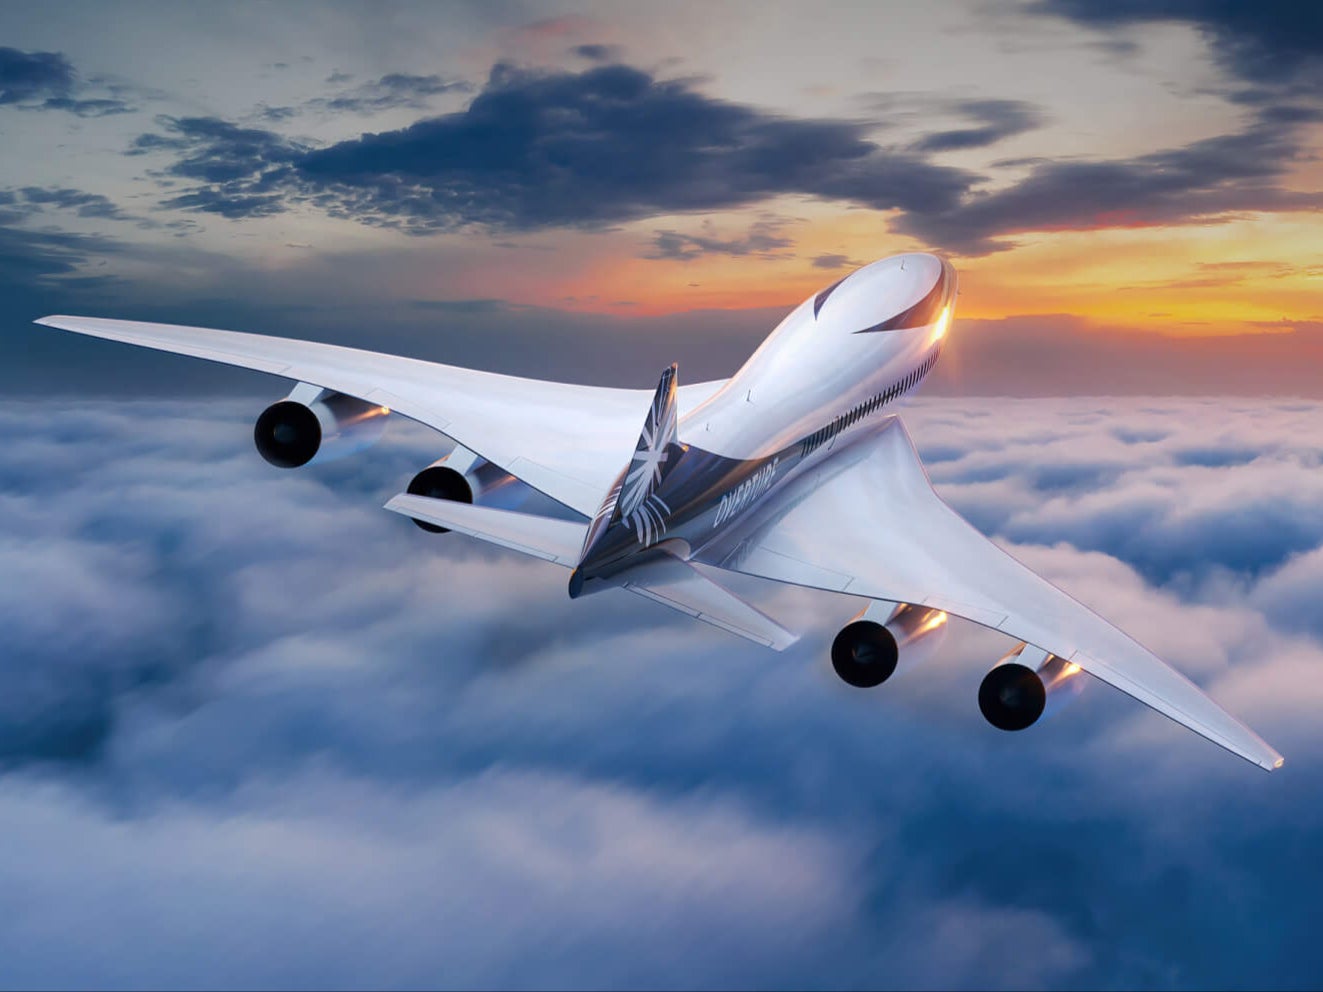 Boom time: Artist’s impression of the Overture supersonic jet